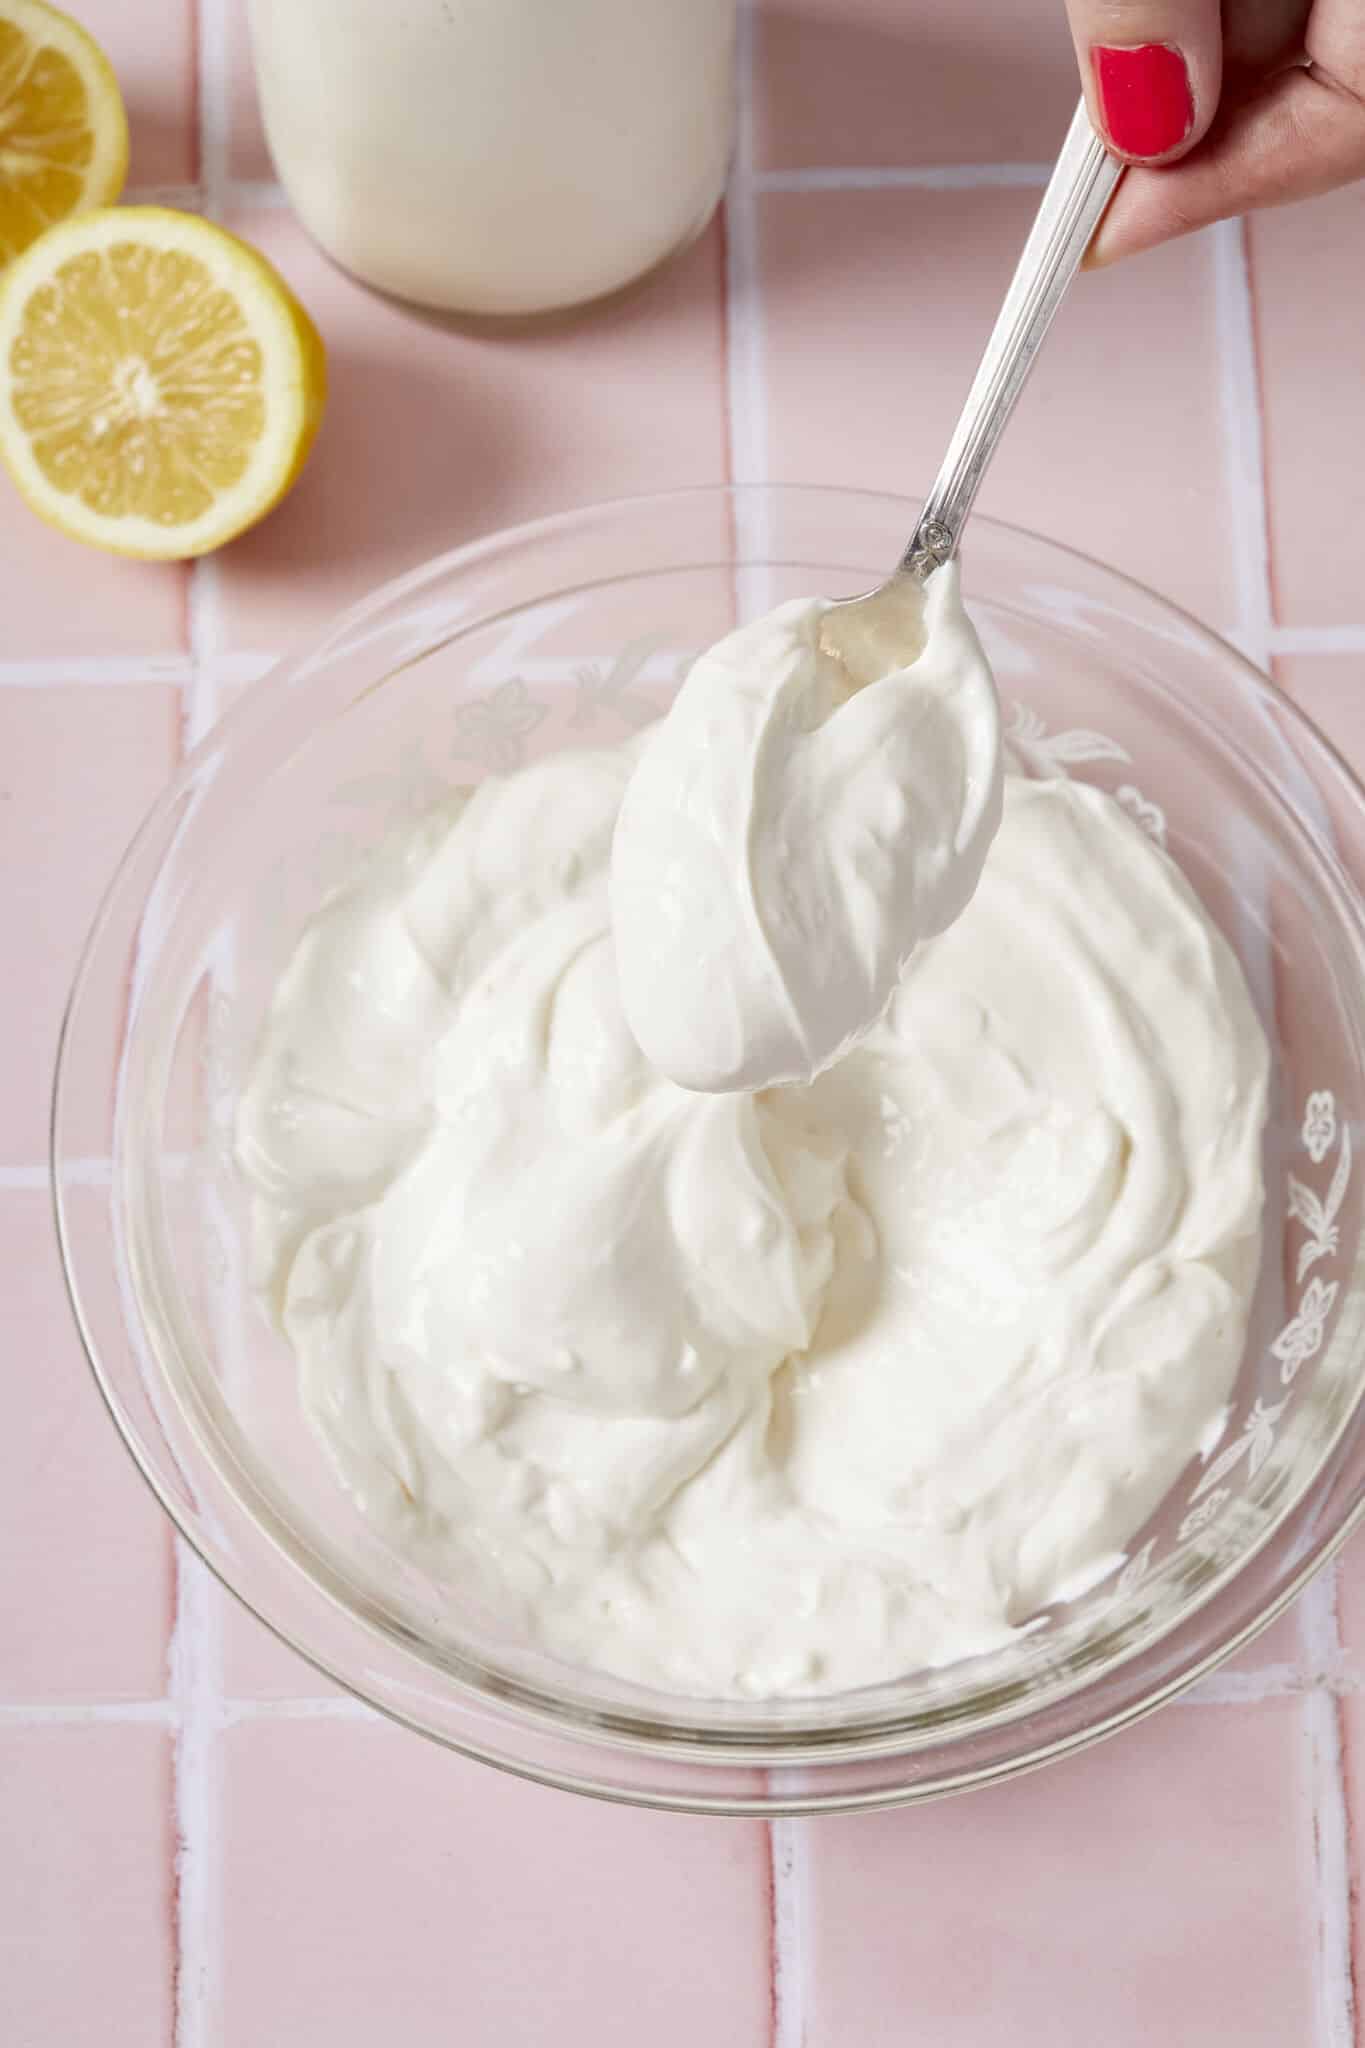 Creamy and smooth cream cheese made with milk and lemon juice.